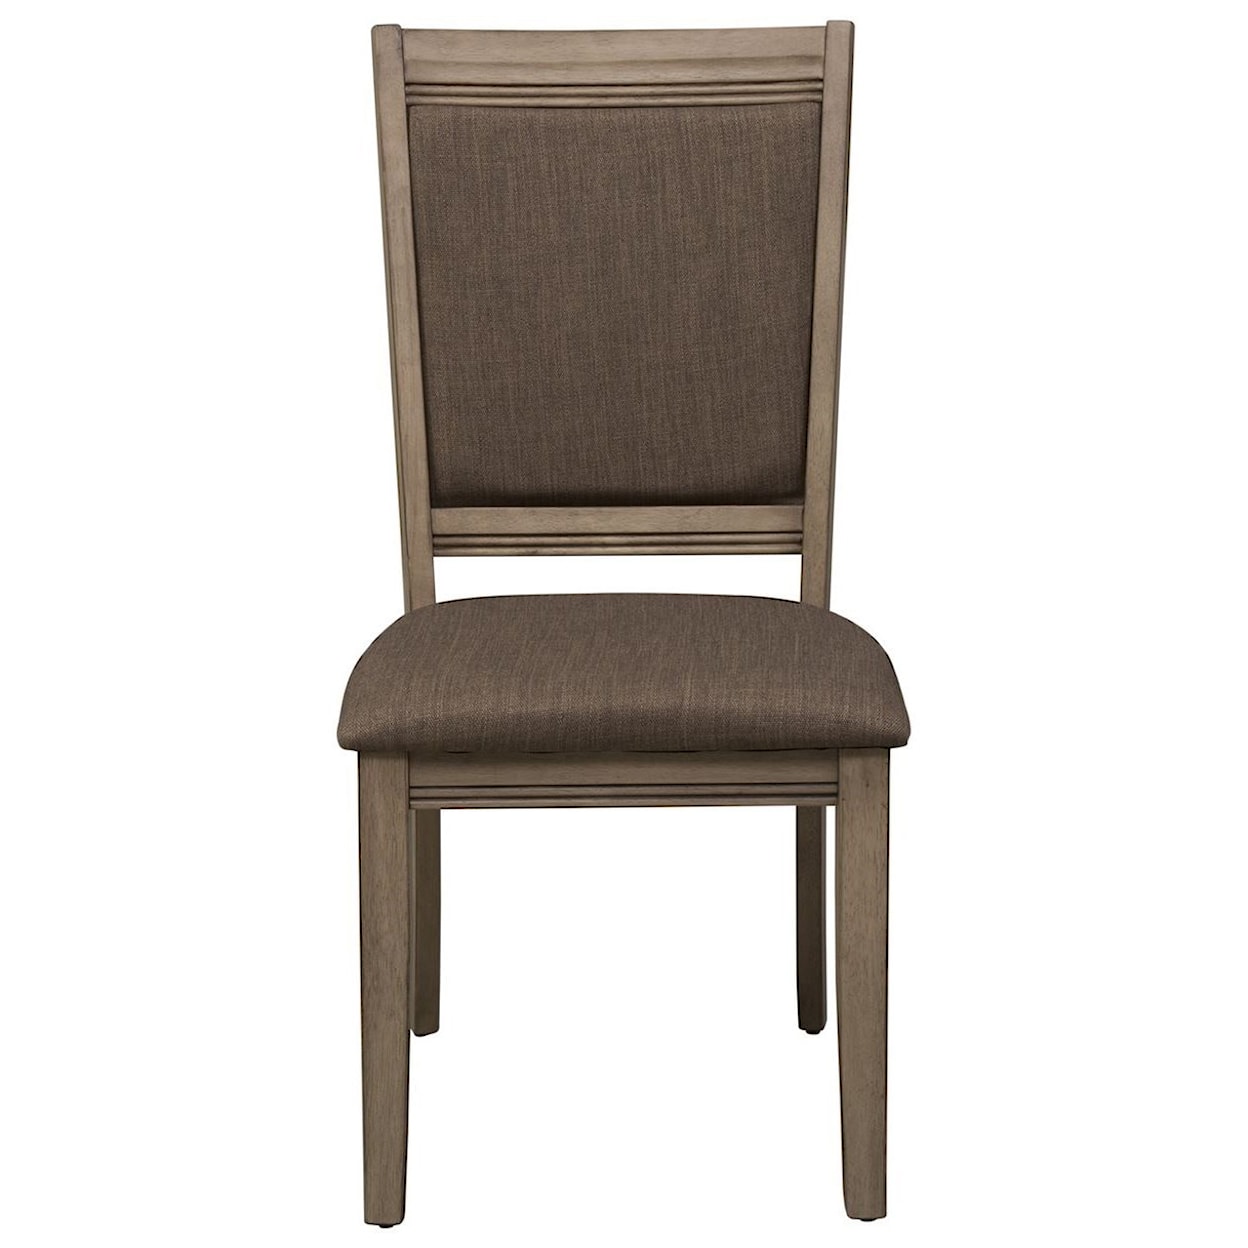 Libby Sun Valley Upholstered Side Chair